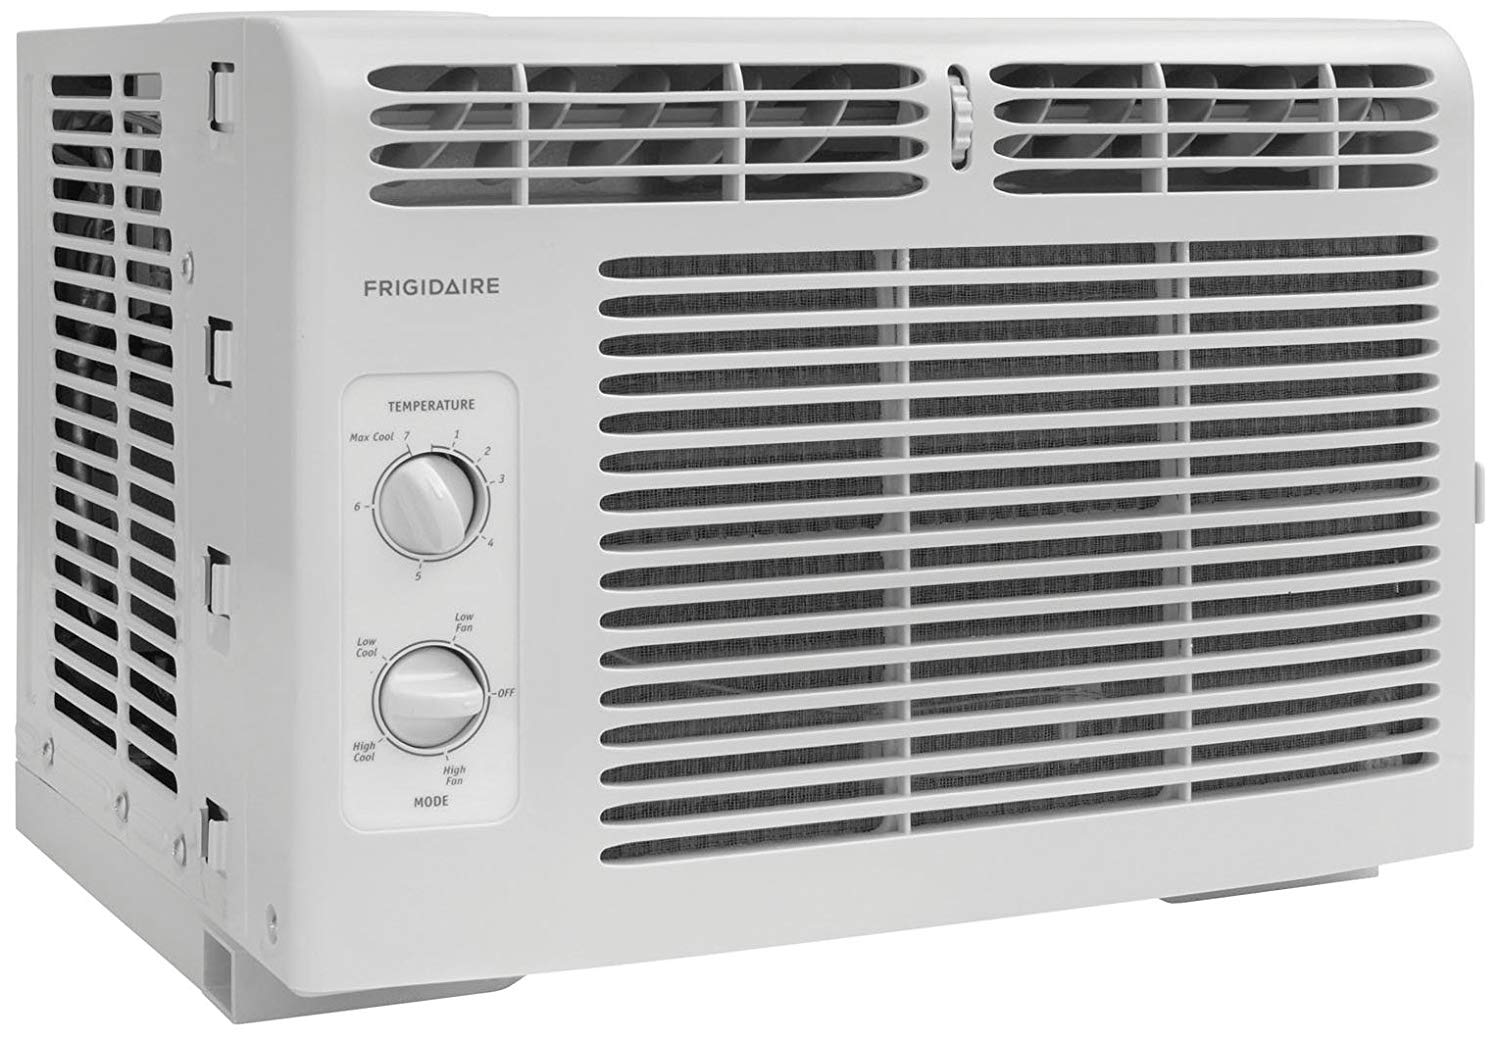 Frigidaire FFRA0511R1 5, 000 BTU 115V Window-Mounted Mini-Compact Air Conditioner with Mechanical Controls